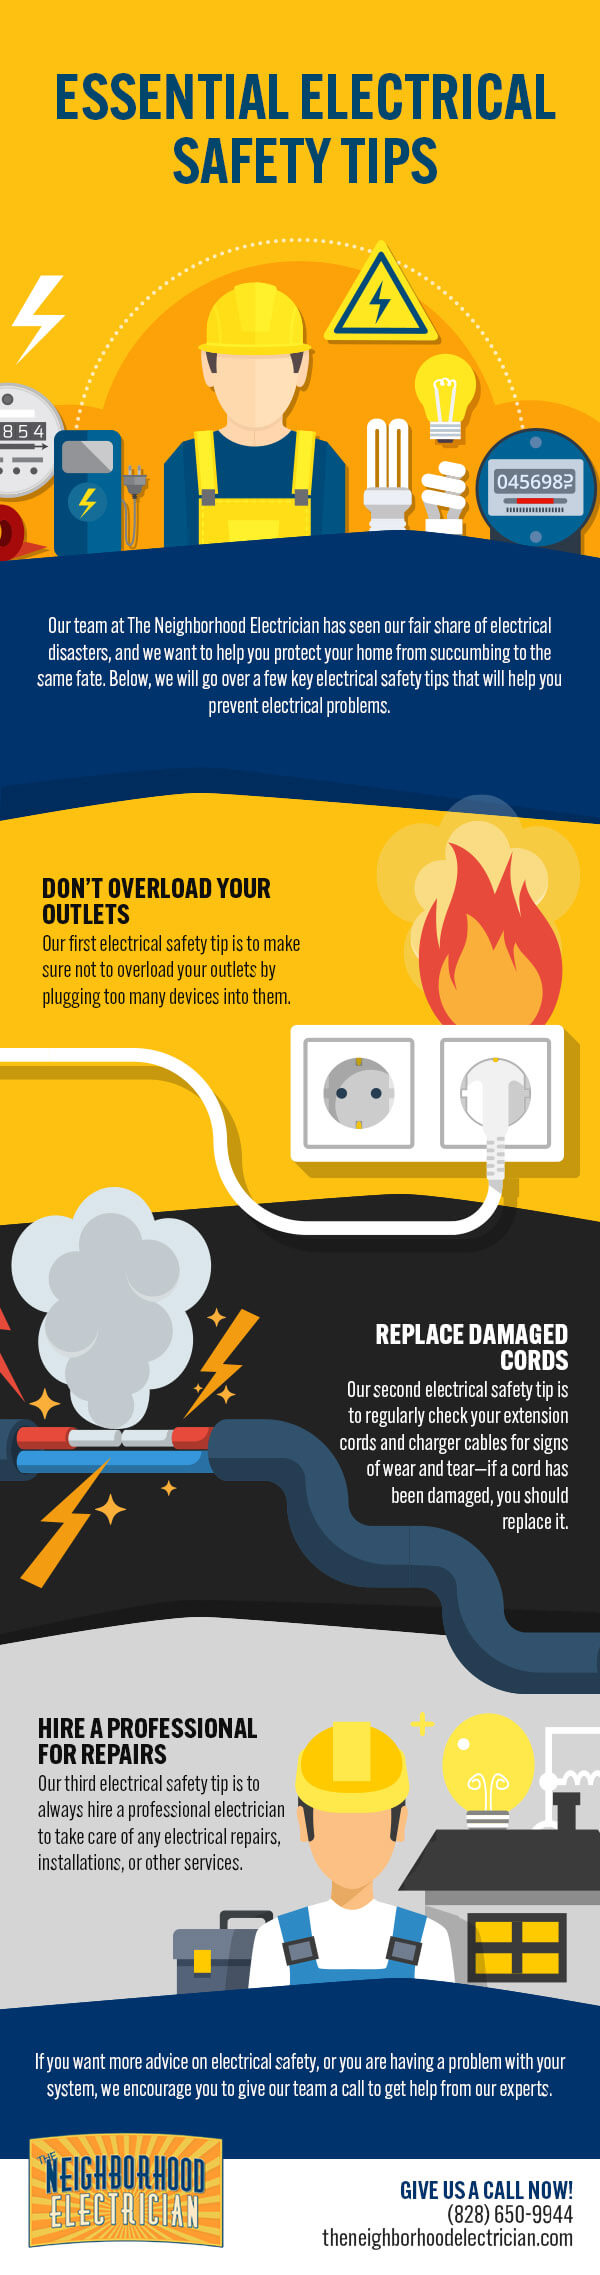 Essential Electrical Safety Tips